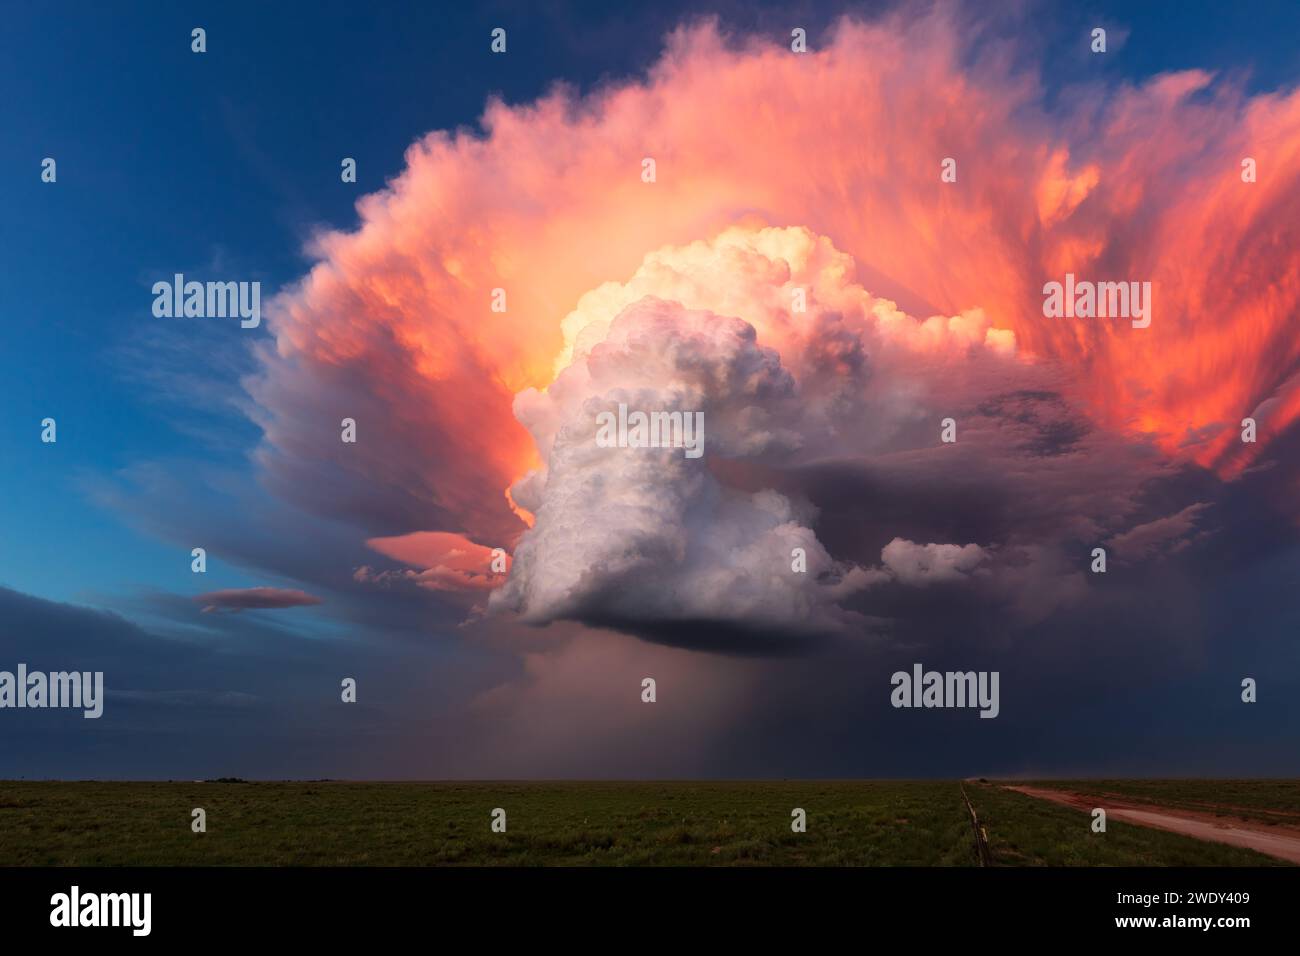 Sunset cloudscape with a supercell thunderstorm near Dalhart, Texas, USA Stock Photo